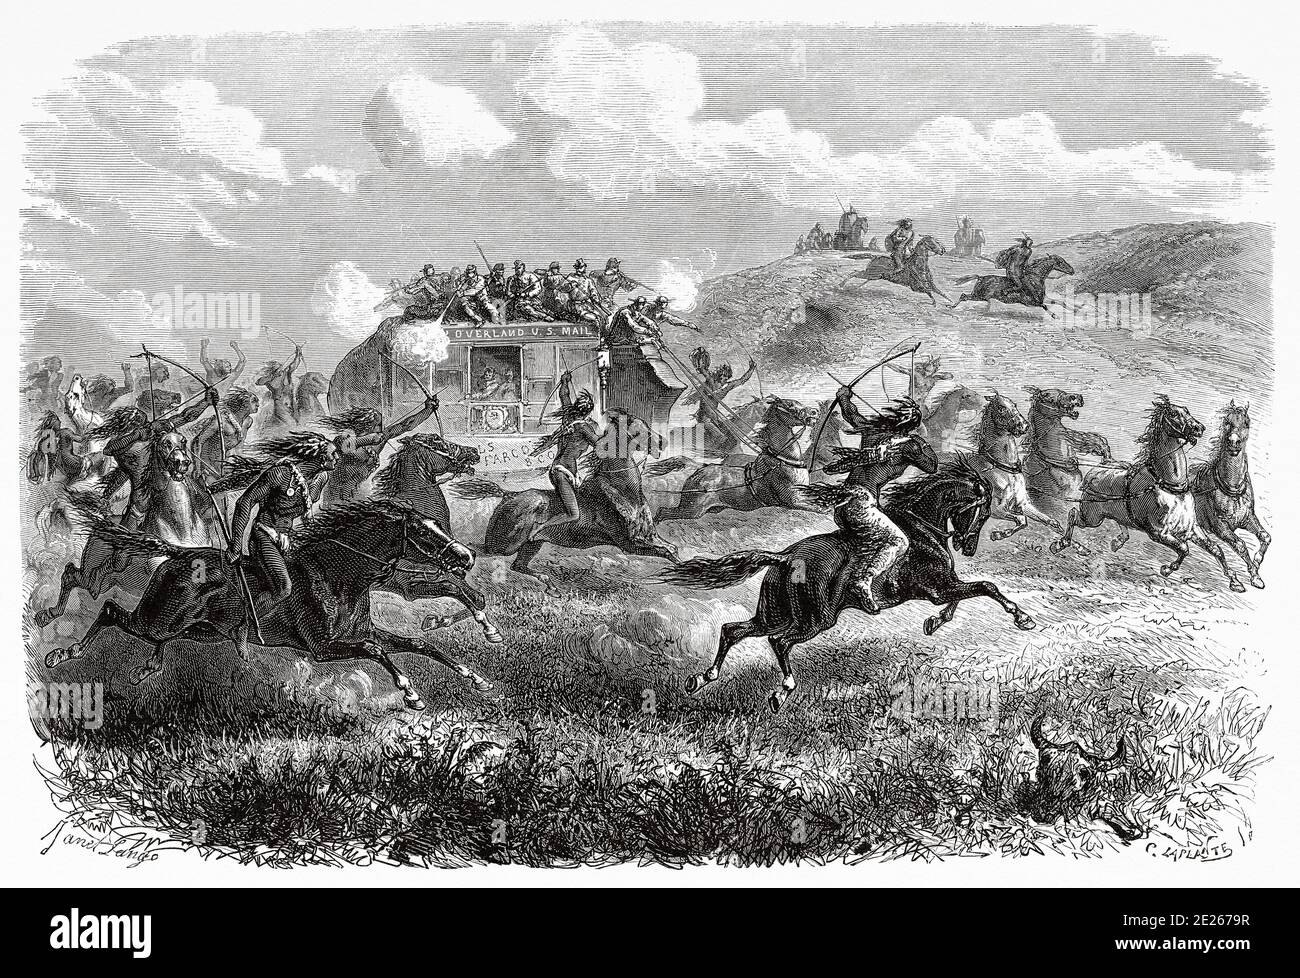 The Indians of Colorado attacking the transcontinental stagecoach in the desert, July 1867, United States of America. Journey to the American far west by Simonin 1867. Old engraving El Mundo en la Mano 1878 Stock Photo